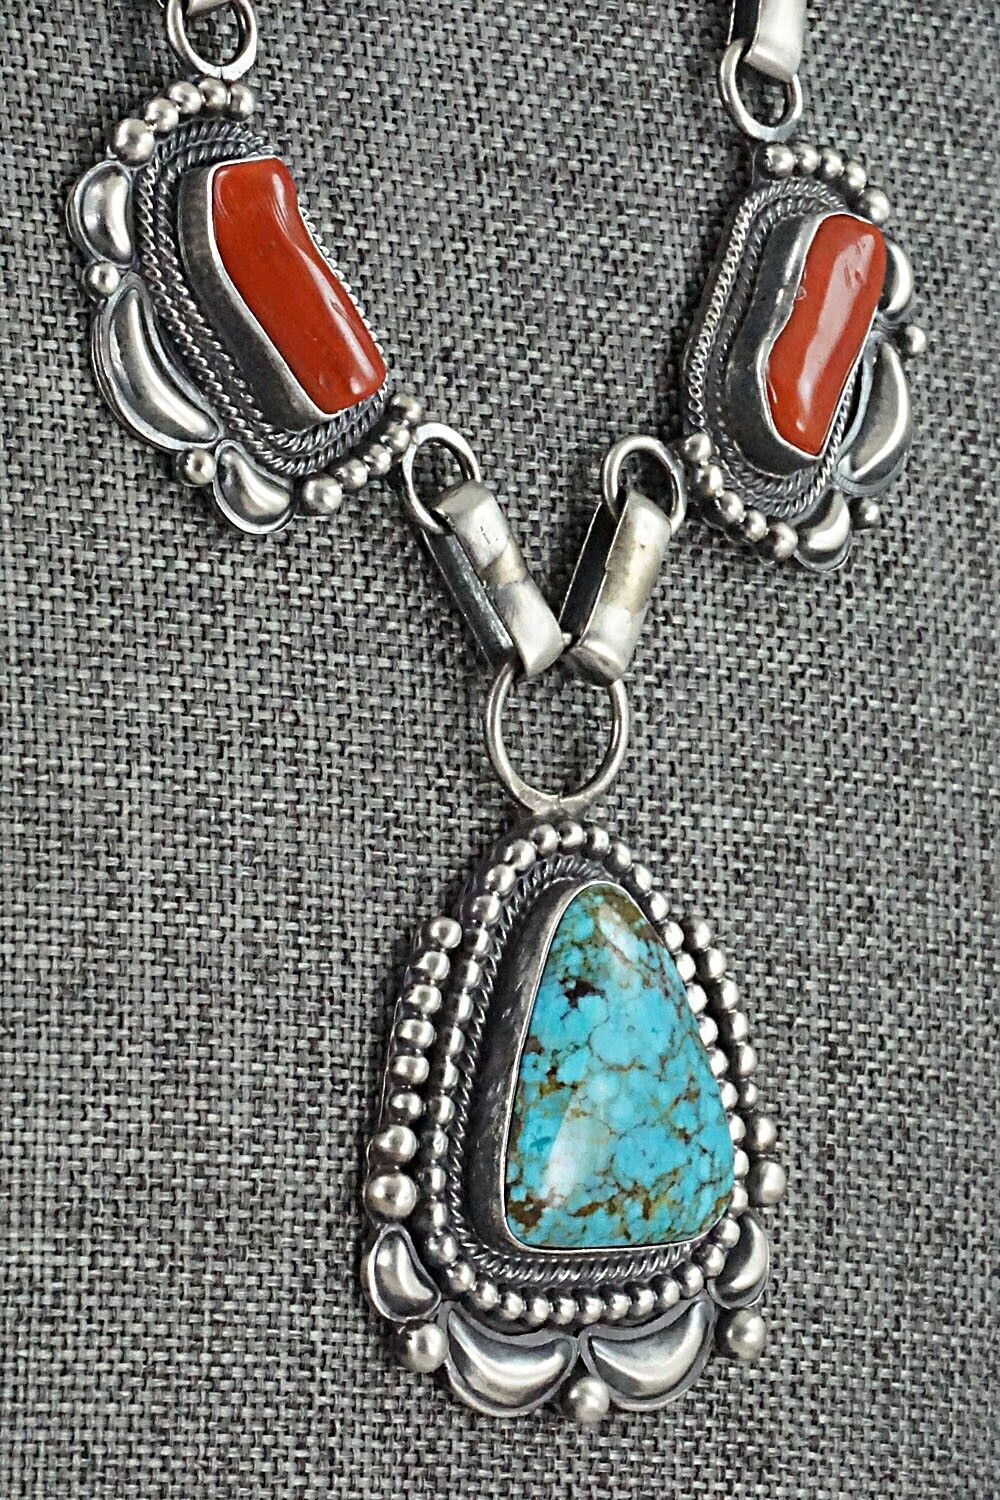 Turquoise, Coral & Sterling Silver Necklace and Earrings Set - Tom Lewis